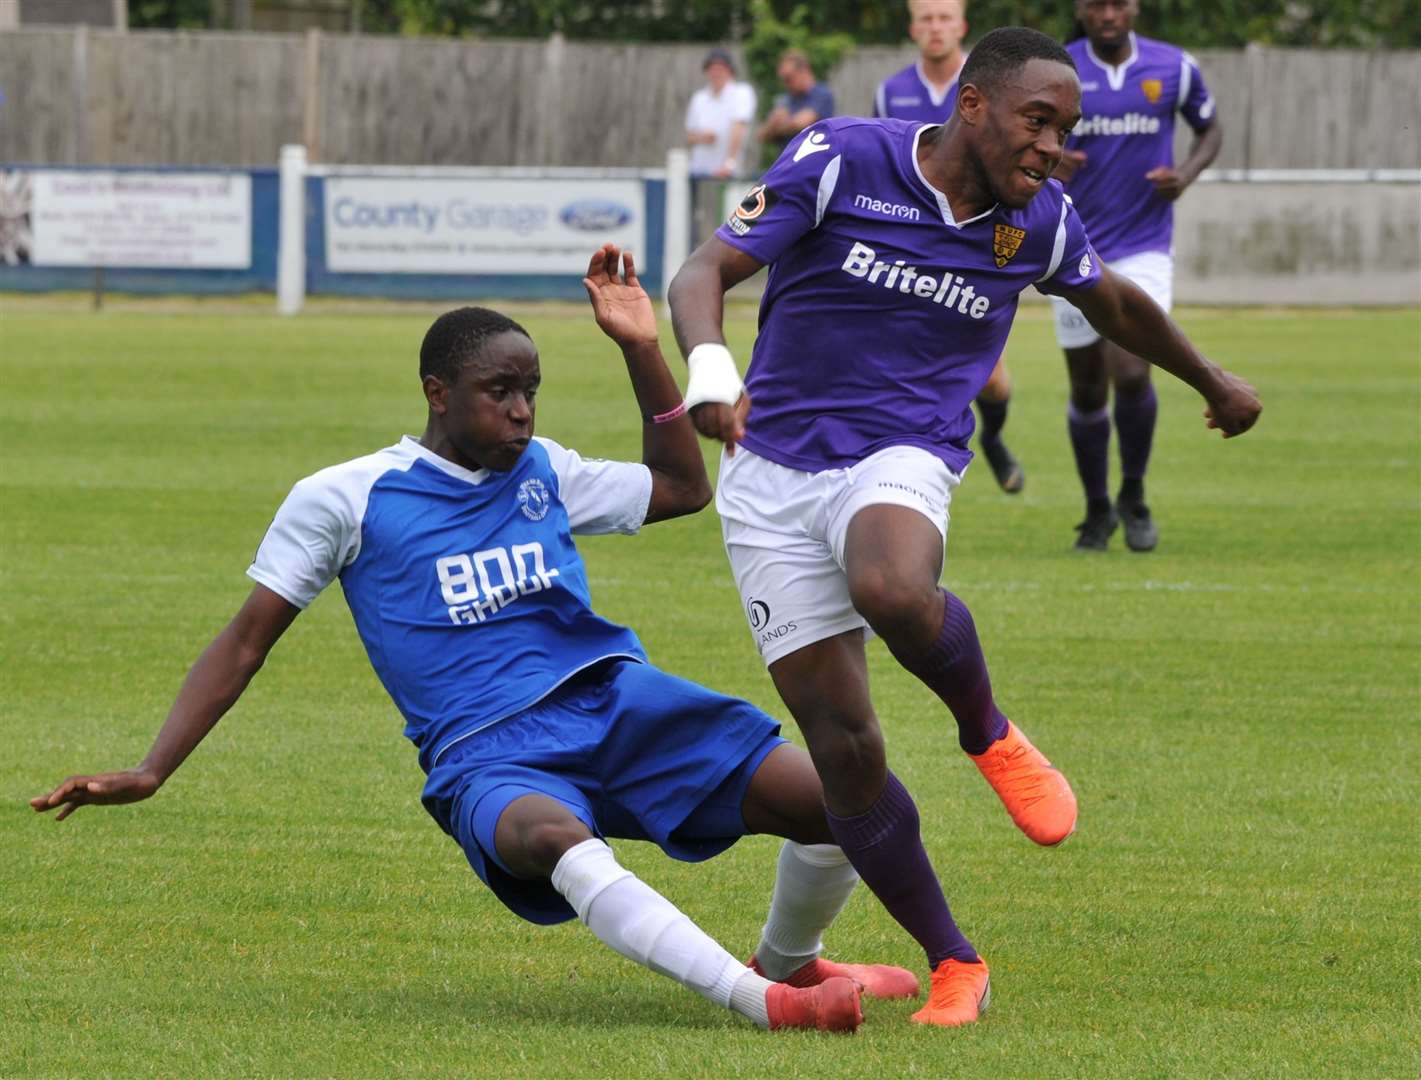 Nana Kyei gets at the Herne Bay defence in first first friendly appearance Picture: Steve Terrell